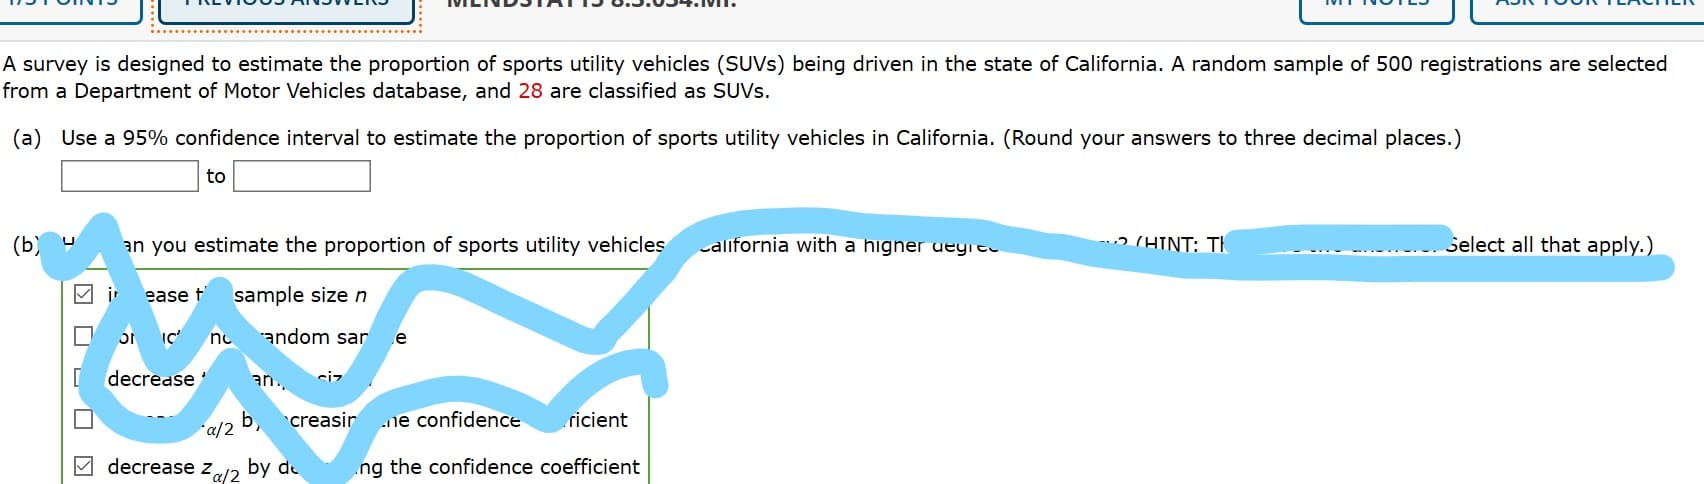 VILINDSTATIS 0.3.05 JMI.
A survey is designed to estimate the proportion of sports utility vehicles (SUVS) being driven in the state of California. A random sample of 500 registrations are selected
from a Department of Motor Vehicles database, and 28 are classified as SUVS.
(a) Use a 95% confidence interval to estimate the proportion of sports utility vehicles in California. (Round your answers to three decimal places.)
to
(Ь)
an you estimate the proportion of sports utility vehicles
california with a higner uegre
ɔ (HINT: TH
Select all that apply.)
M i ease f
sample size n
no
andom sar e
decrease
an.
siz
creasir
ricient
Ь
ne confidence
a/2
M decrease z12 by de
ng the confidence coefficient
